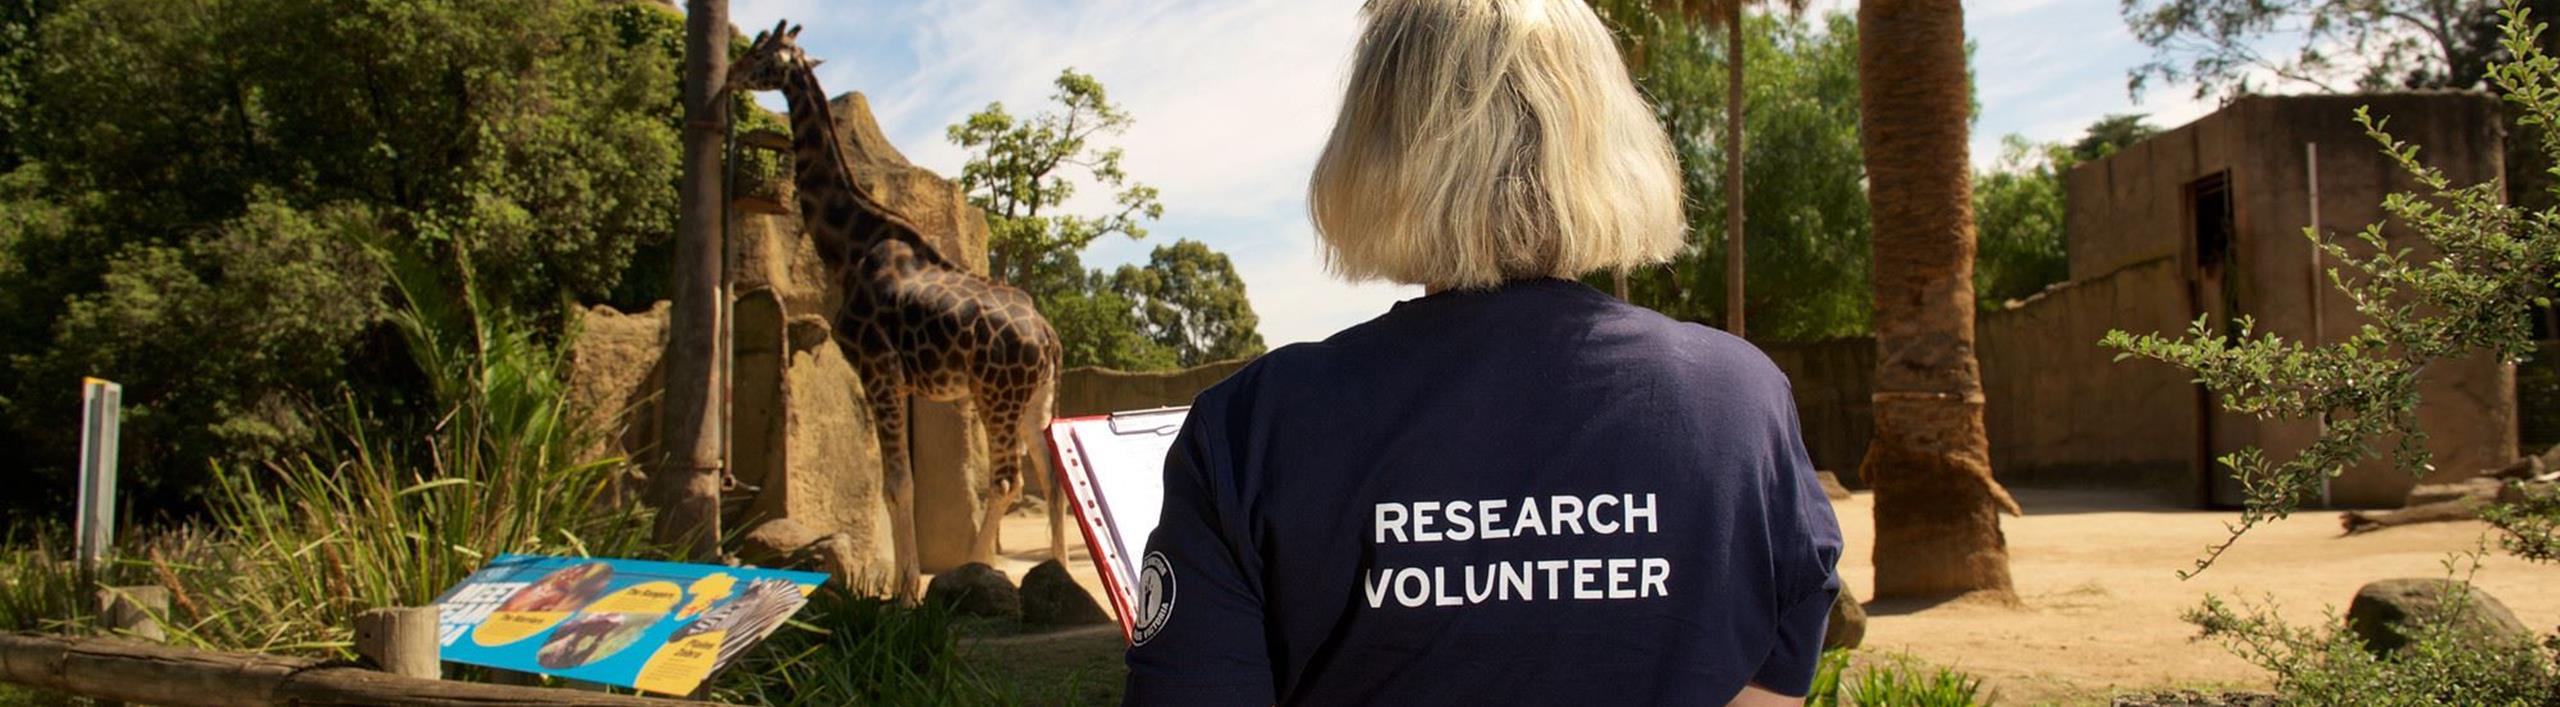 Woman wearing tshirt saying Research Assistant looking at giraffe.